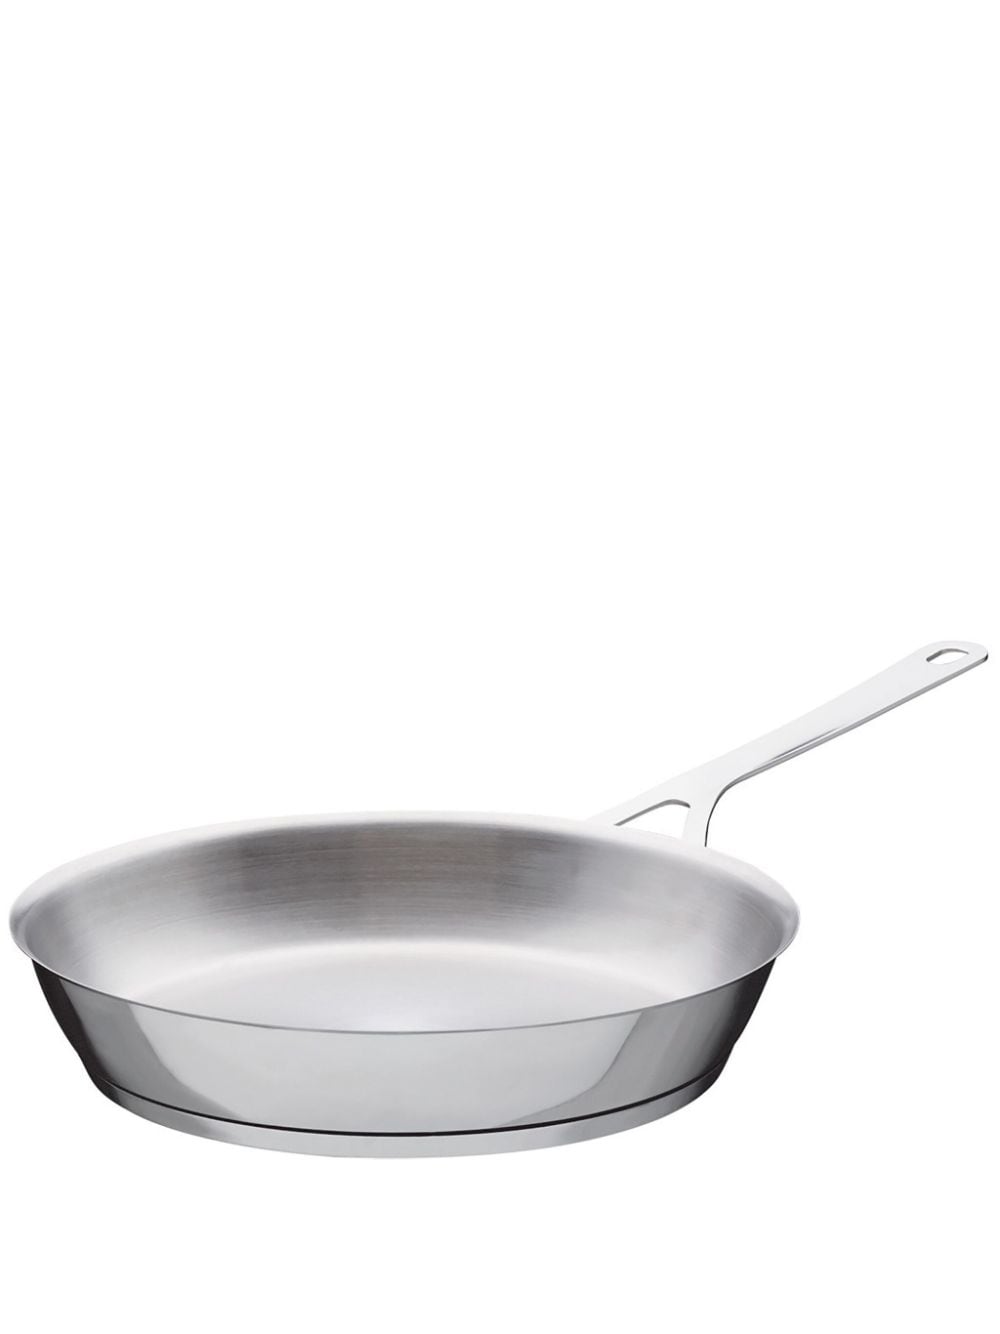 Alessi Pots&Pans stainless steel frying pan - Silver von Alessi